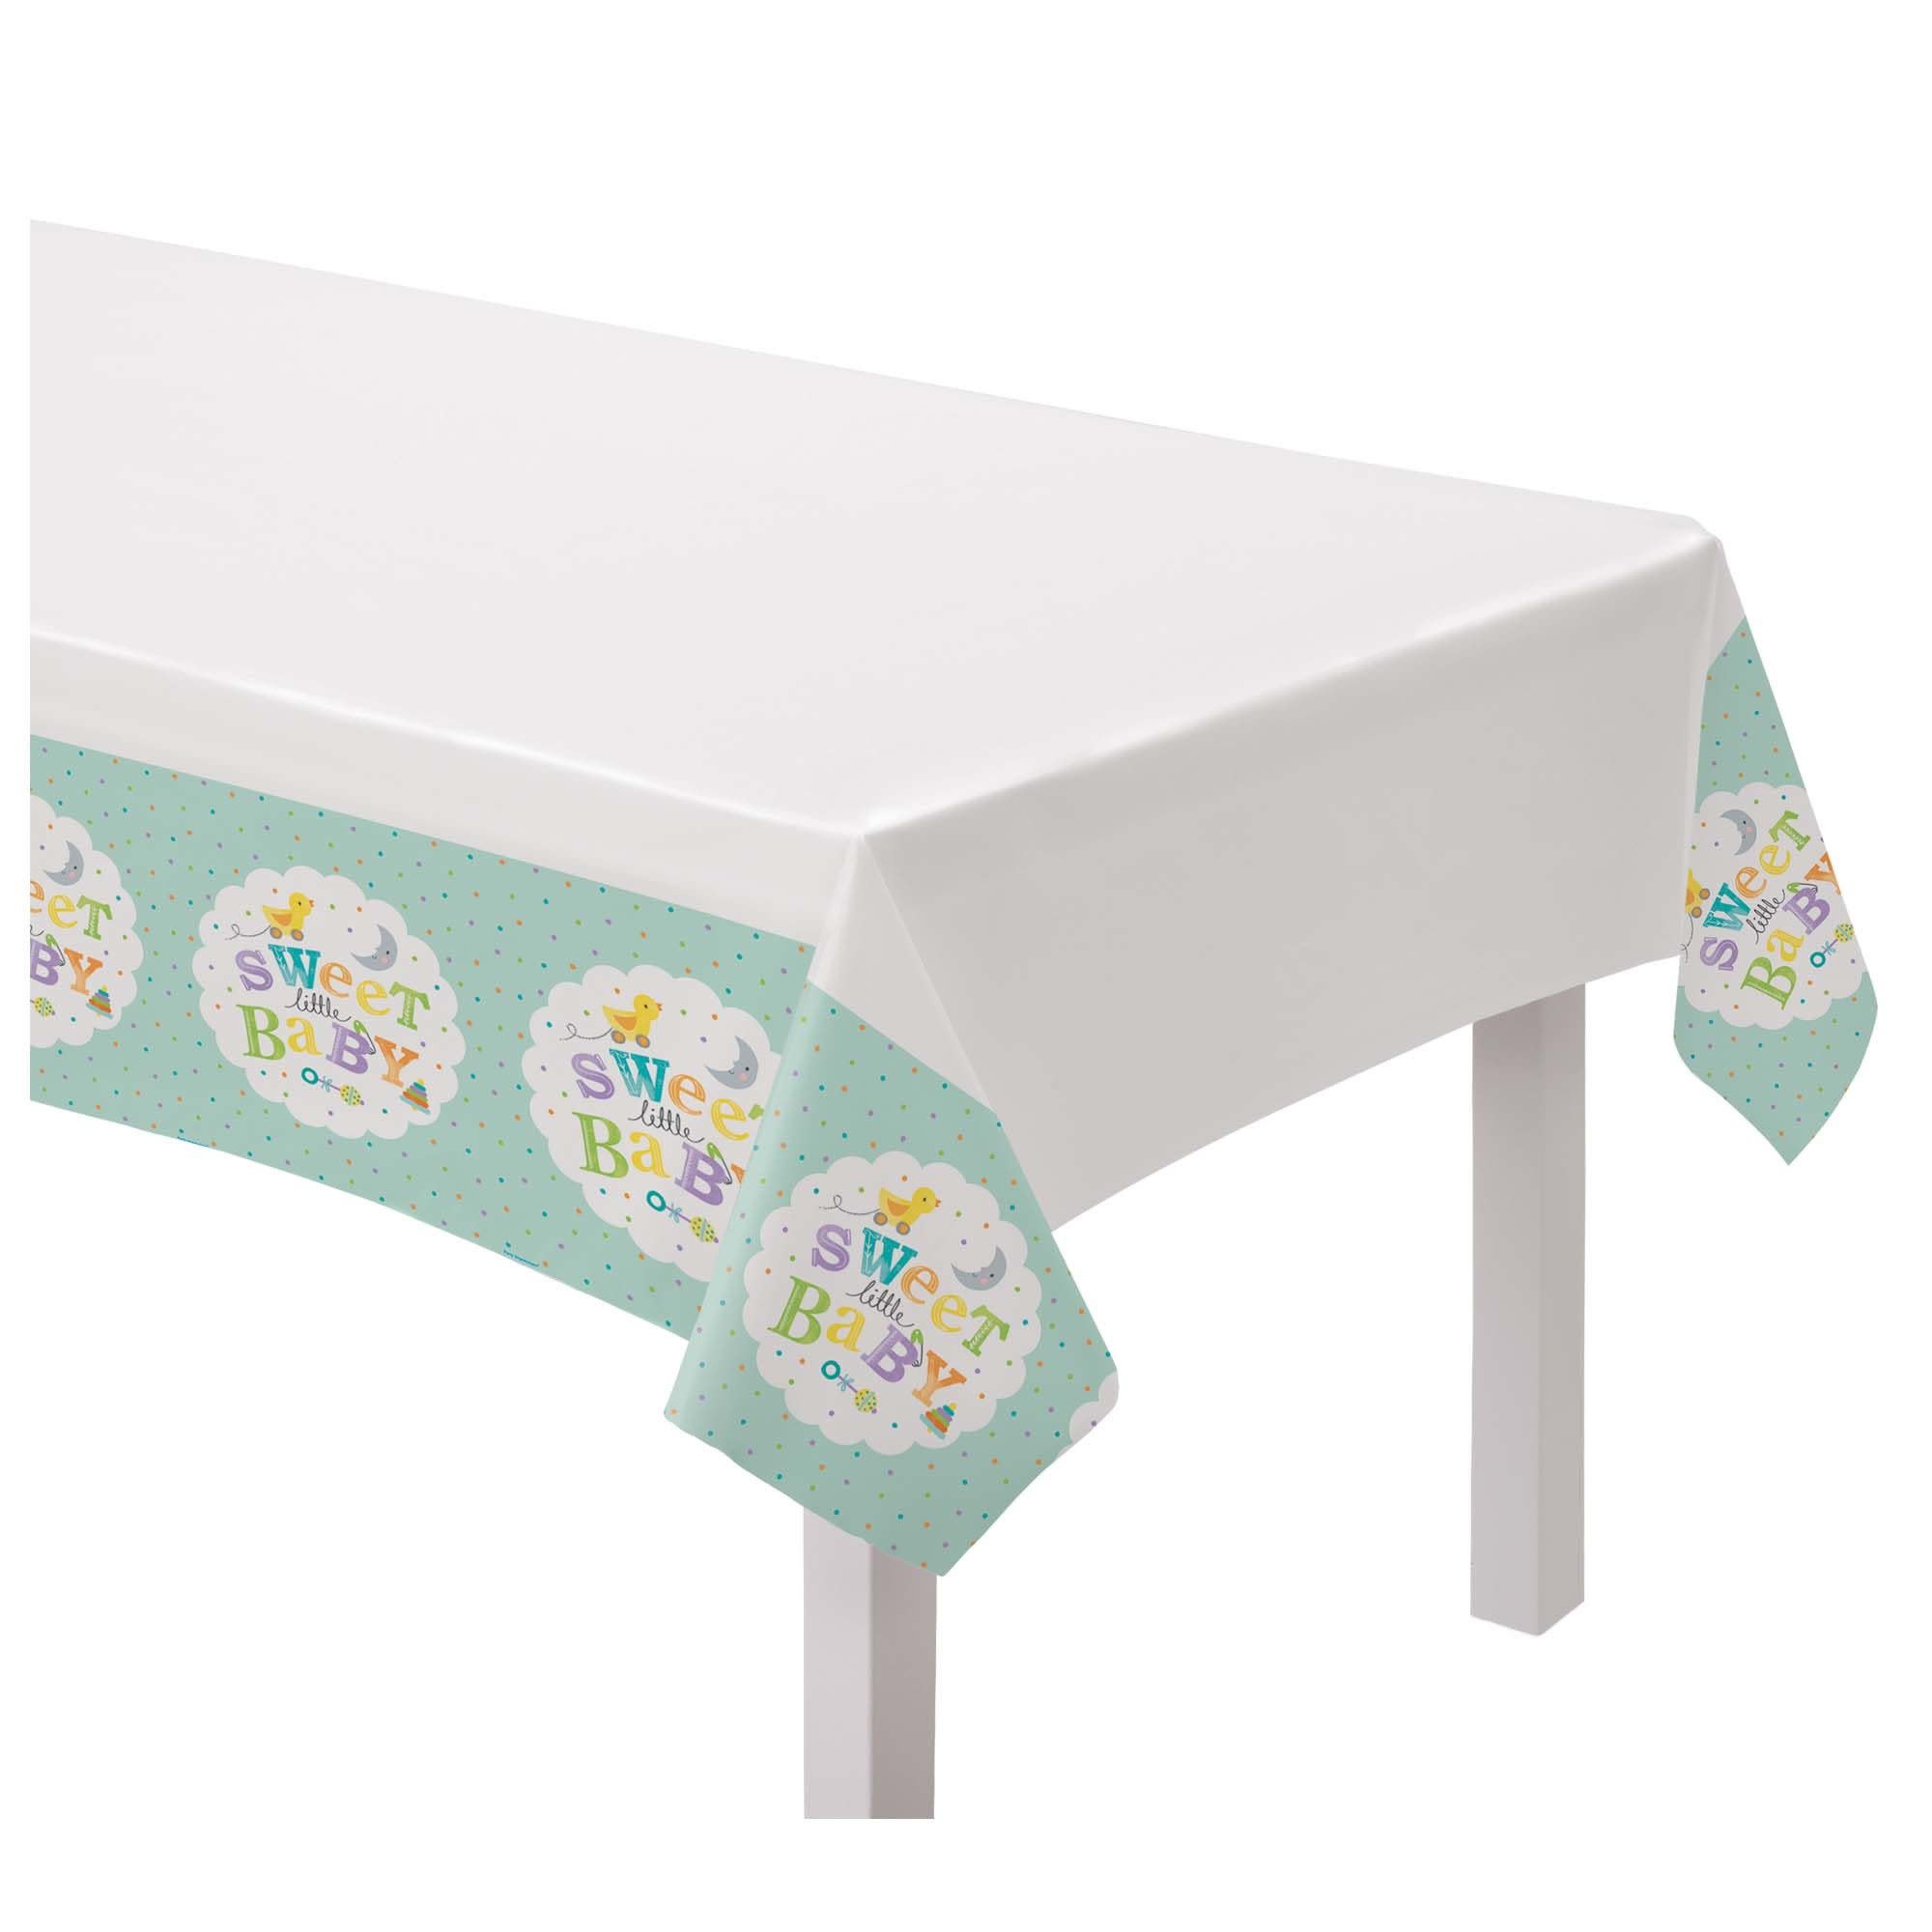 Sweet Little Baby Plastic Table Cover